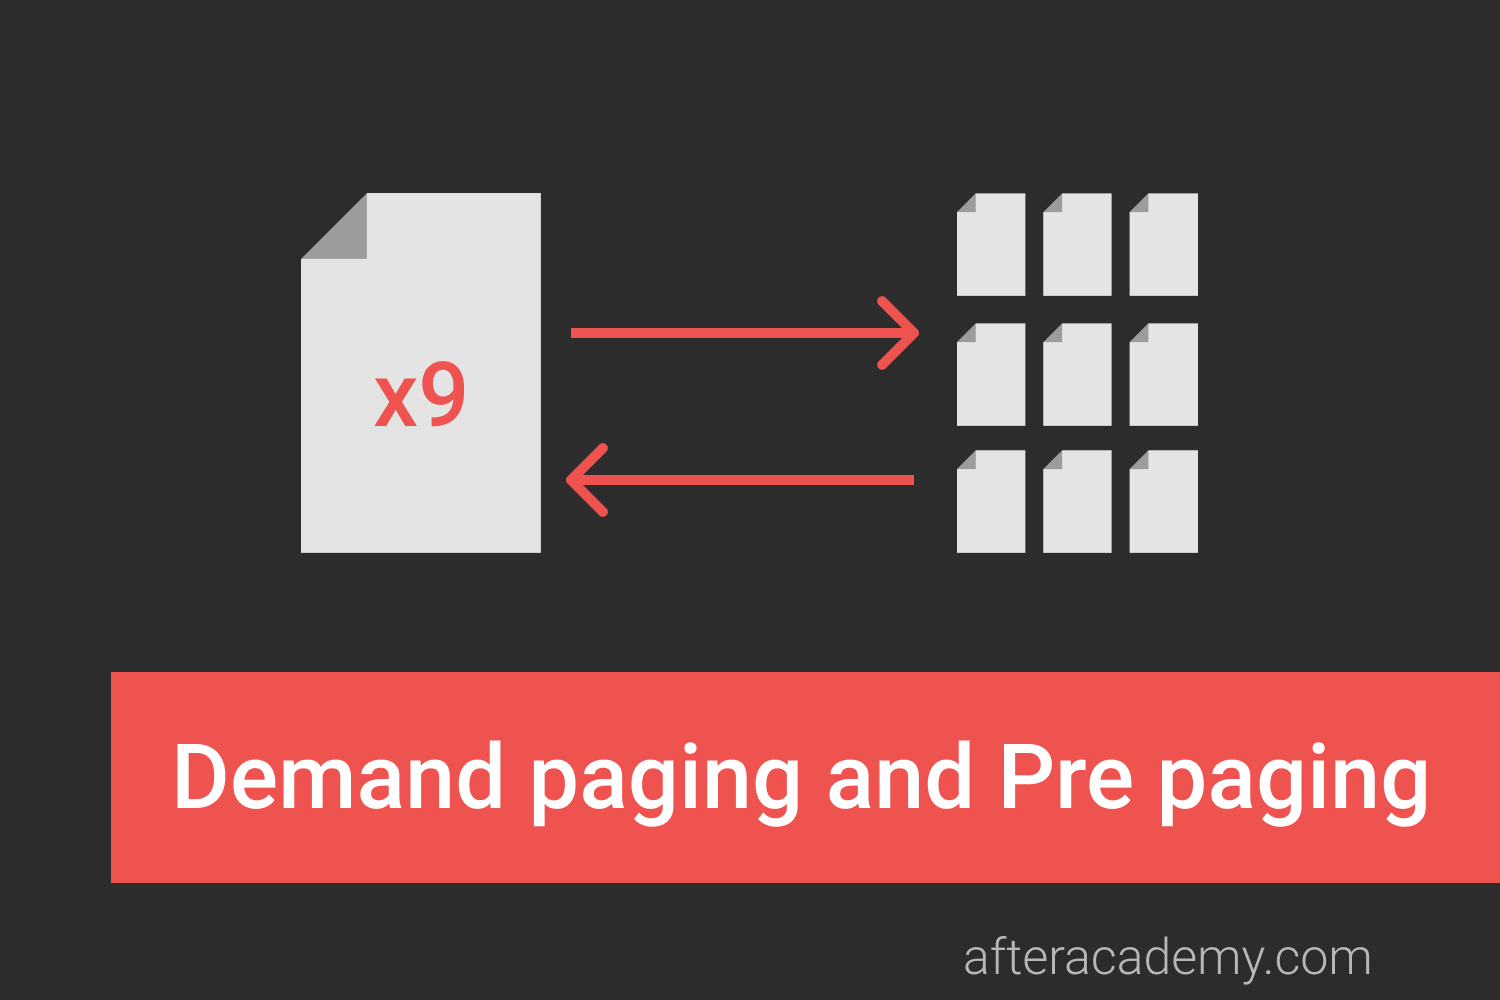 What are demand-paging and pre-paging?